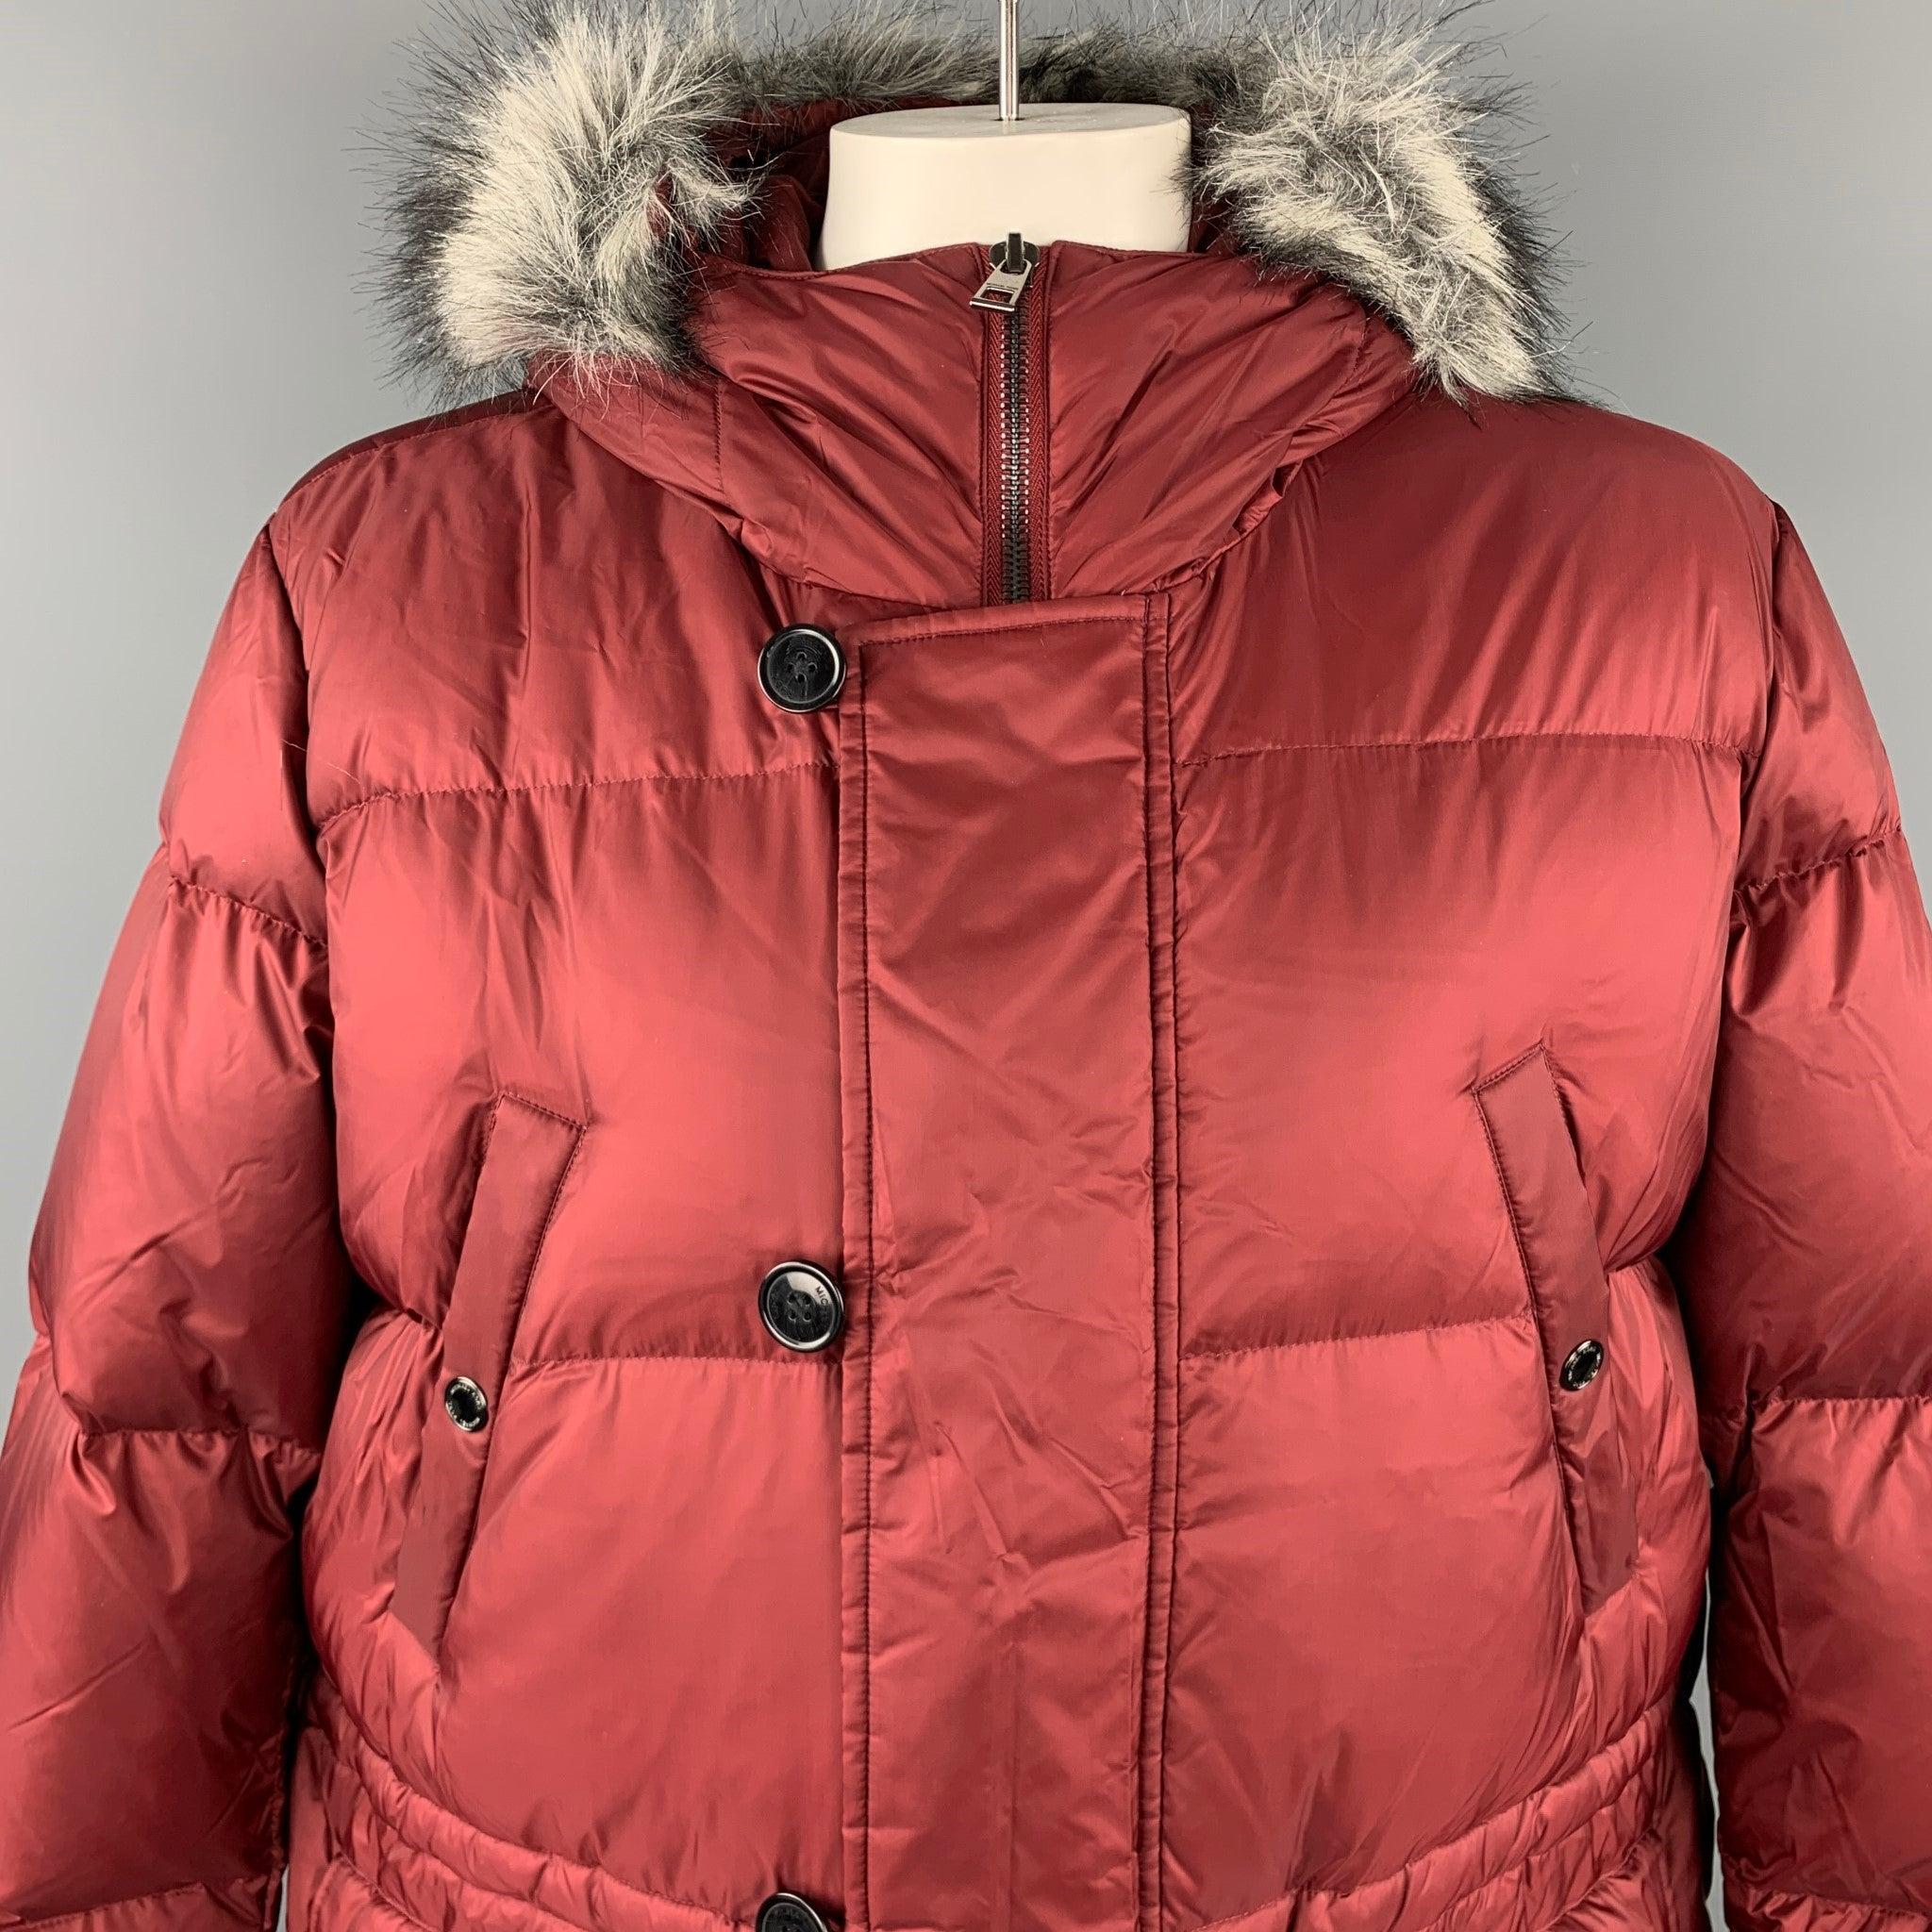 MICHAEL KORS coat comes in a burgundy quilted nylon with down fill featuring detachable hood, front pockets, and a button & zip up closure.
New With Tags. 

Marked:  XXL 

Measurements: 
 
Shoulder: 21 inches 
Bust: 54 inches 
Sleeve: 27 inches